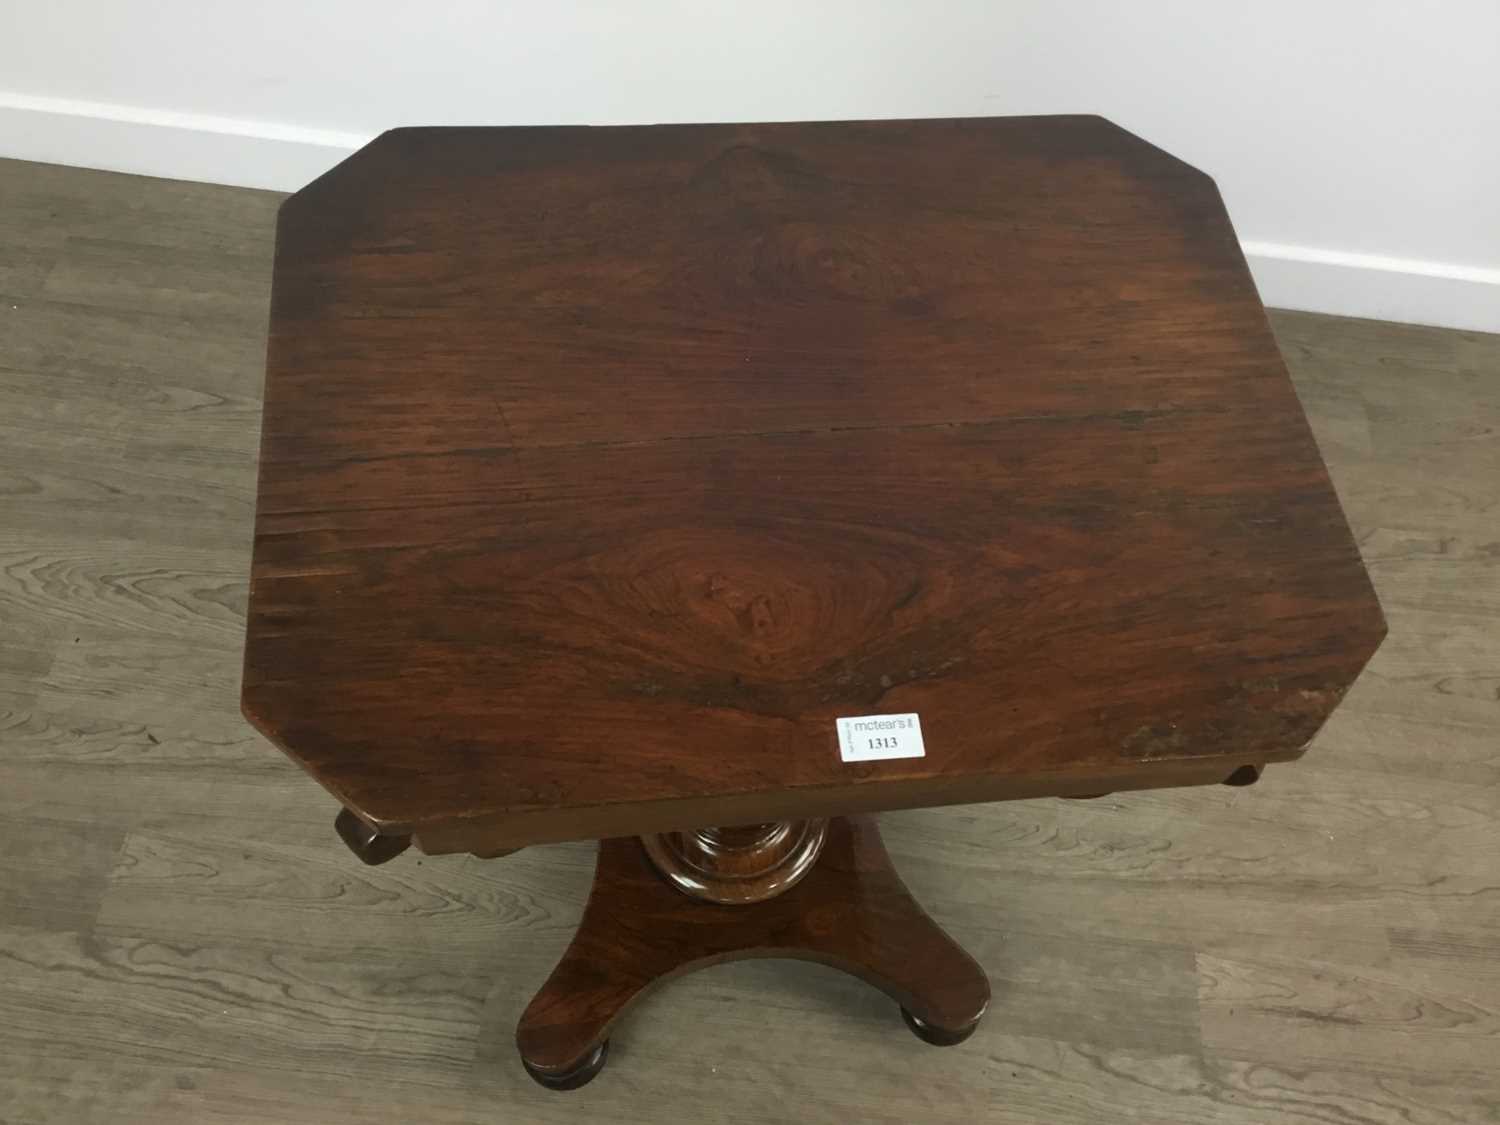 VICTORIAN ROSEWOOD SEWING TABLE, MID-19TH CENTURY - Image 2 of 2